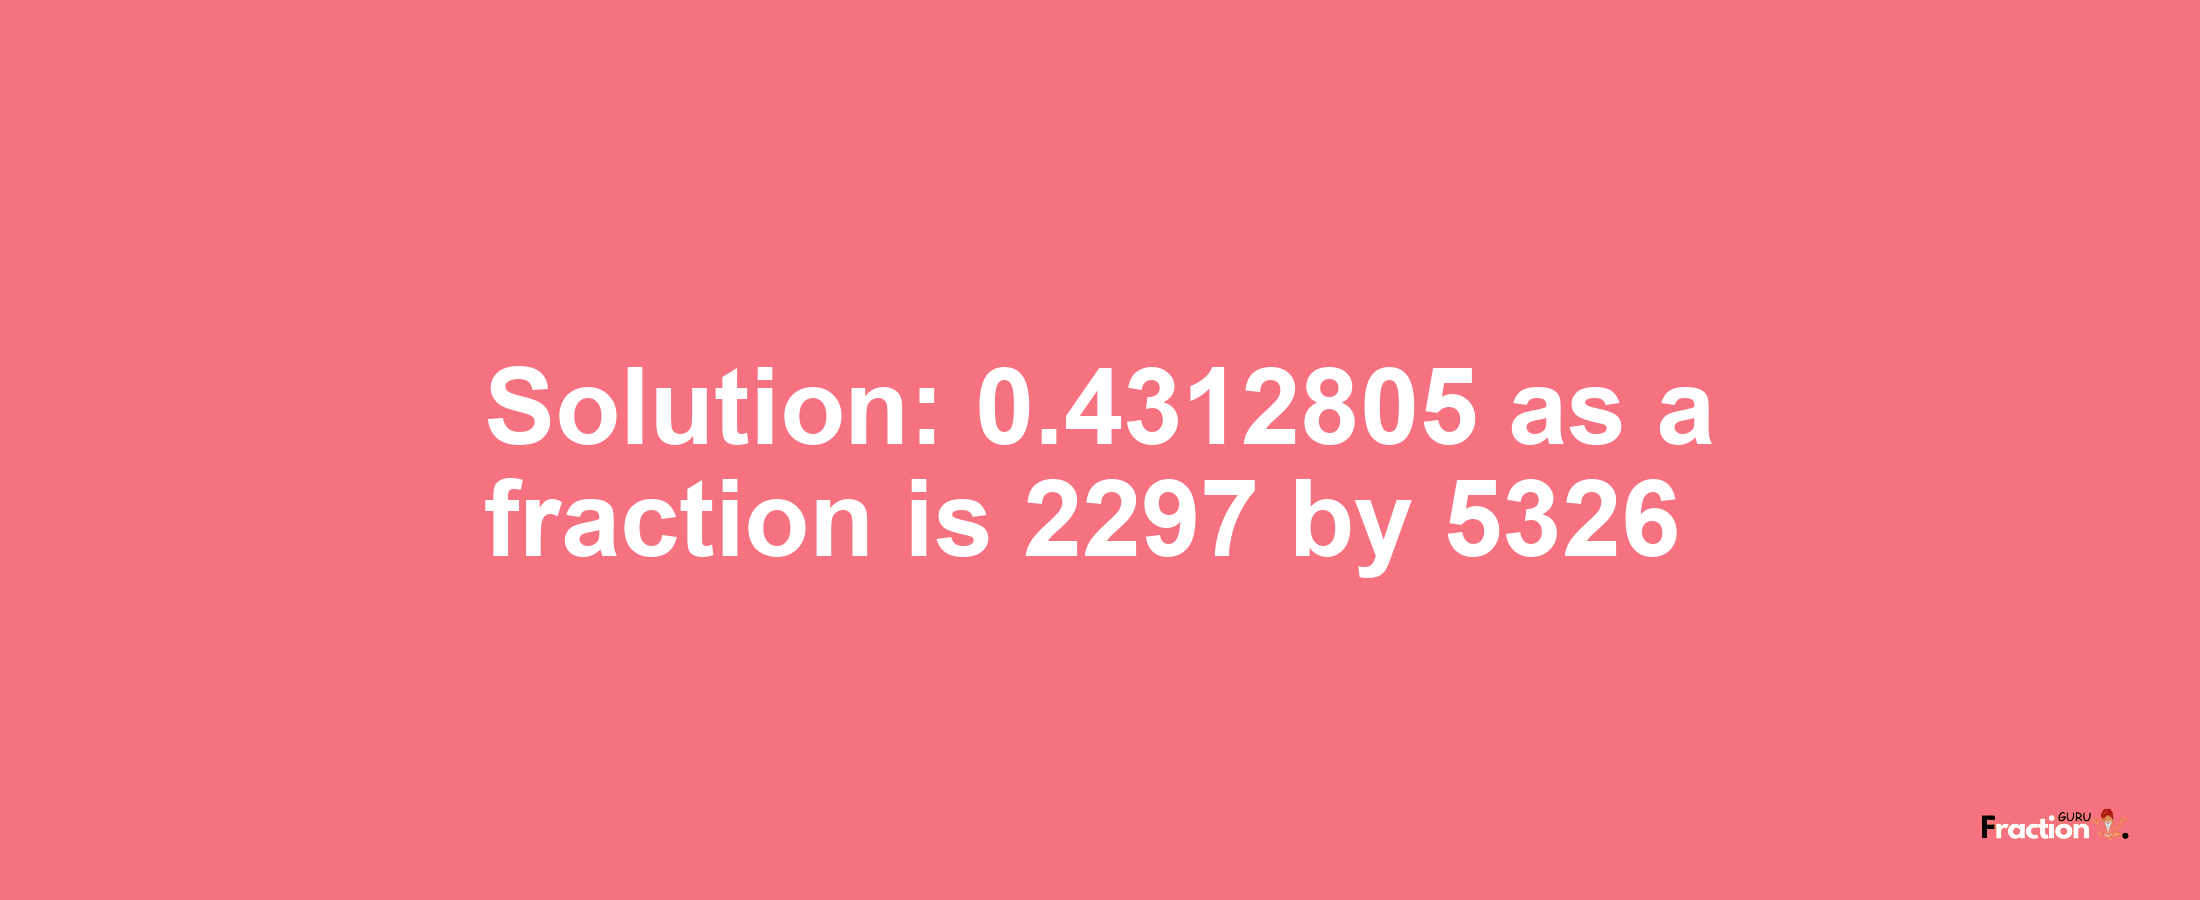 Solution:0.4312805 as a fraction is 2297/5326